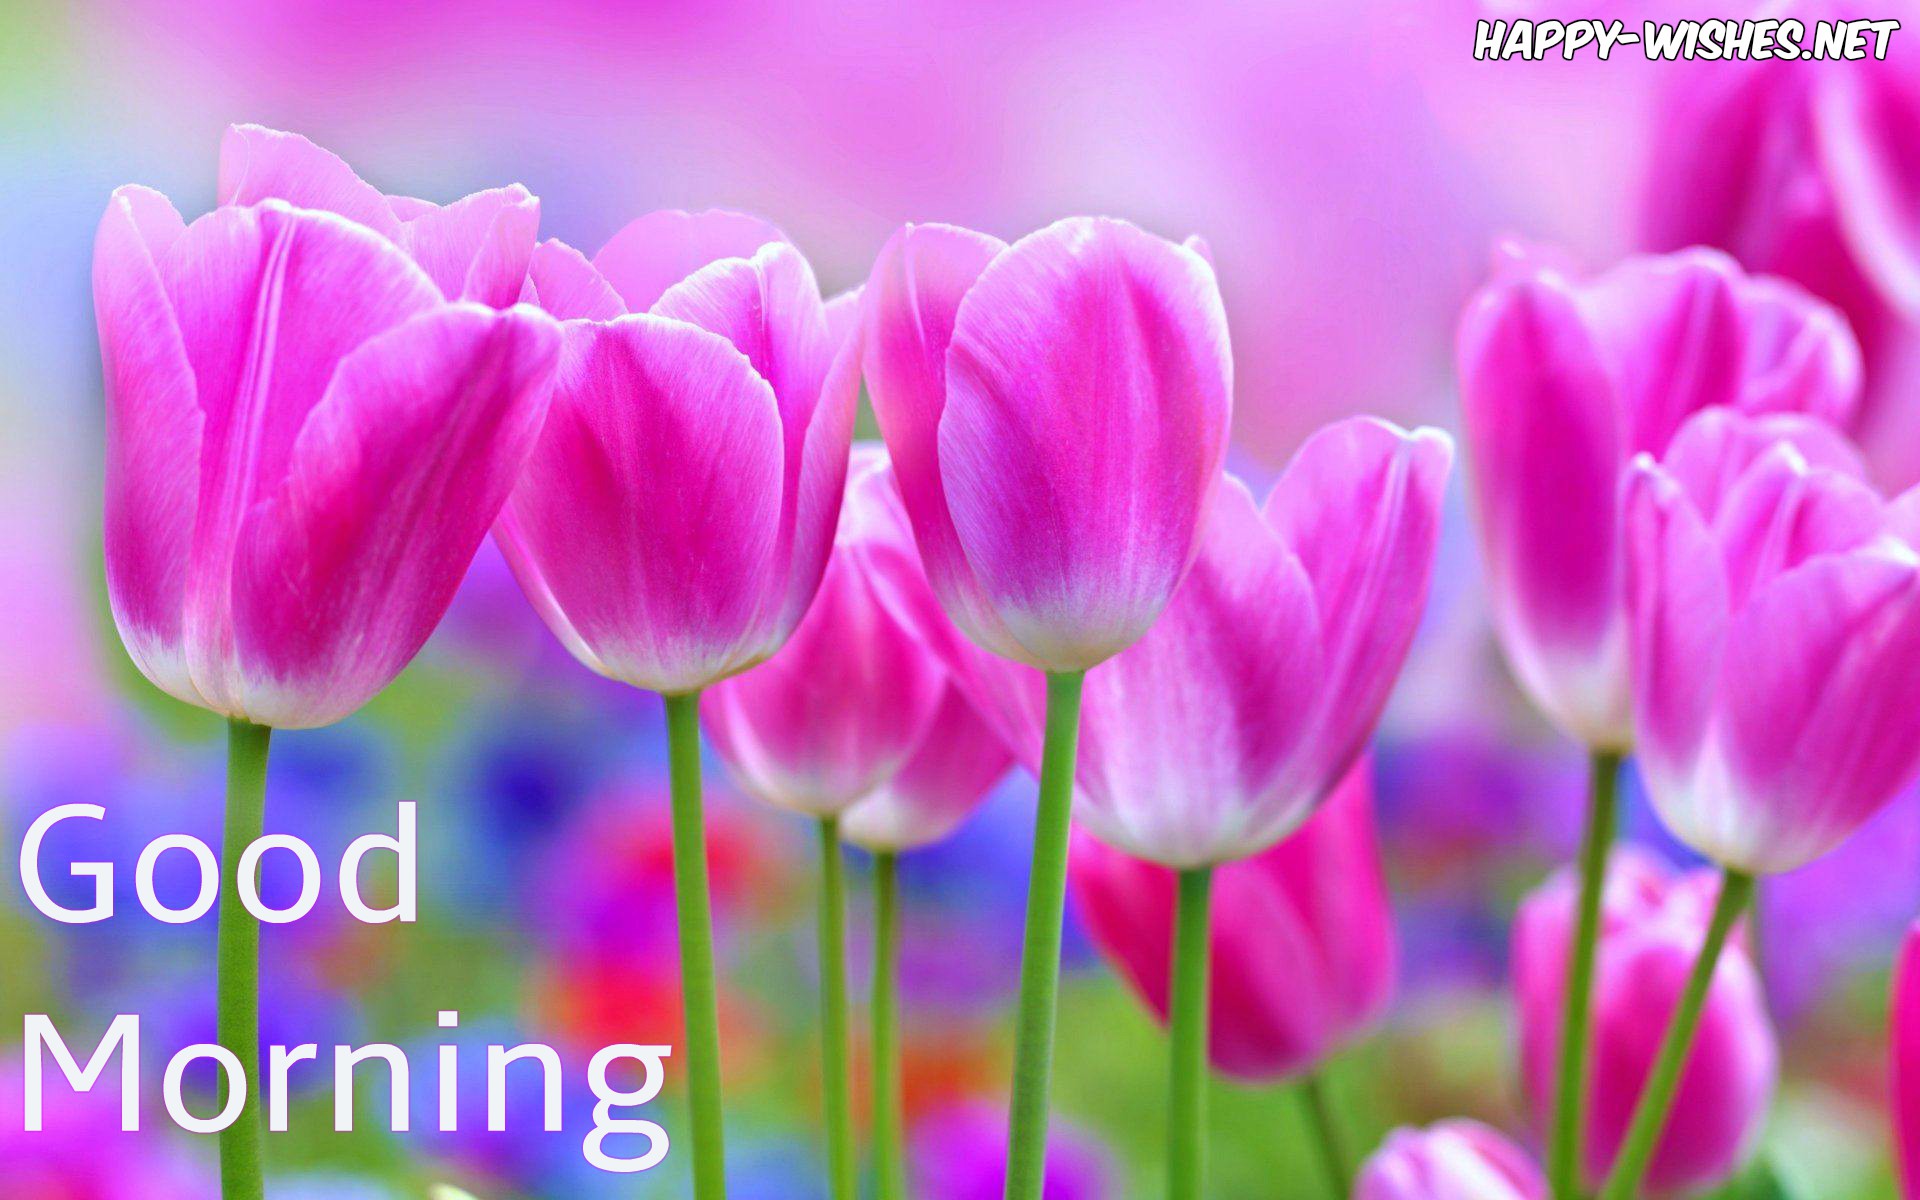 Good morning Wishes With Flowers Images - Happy Wishes